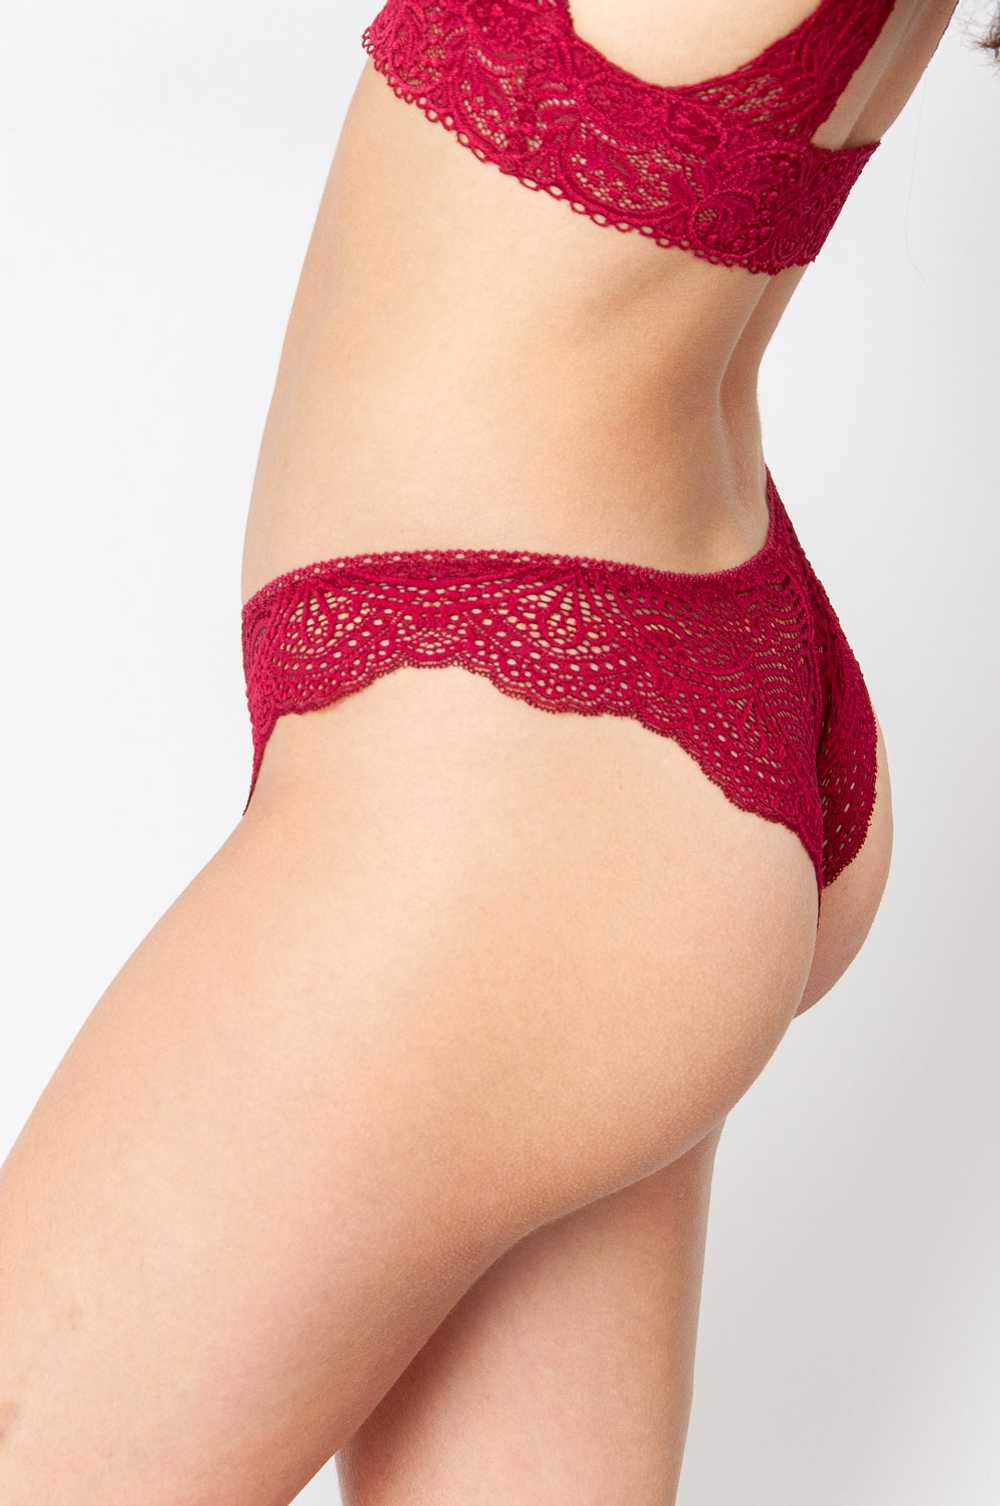 Körbchen Slip Made Of Recycled Lace “Helena” Red - image 5